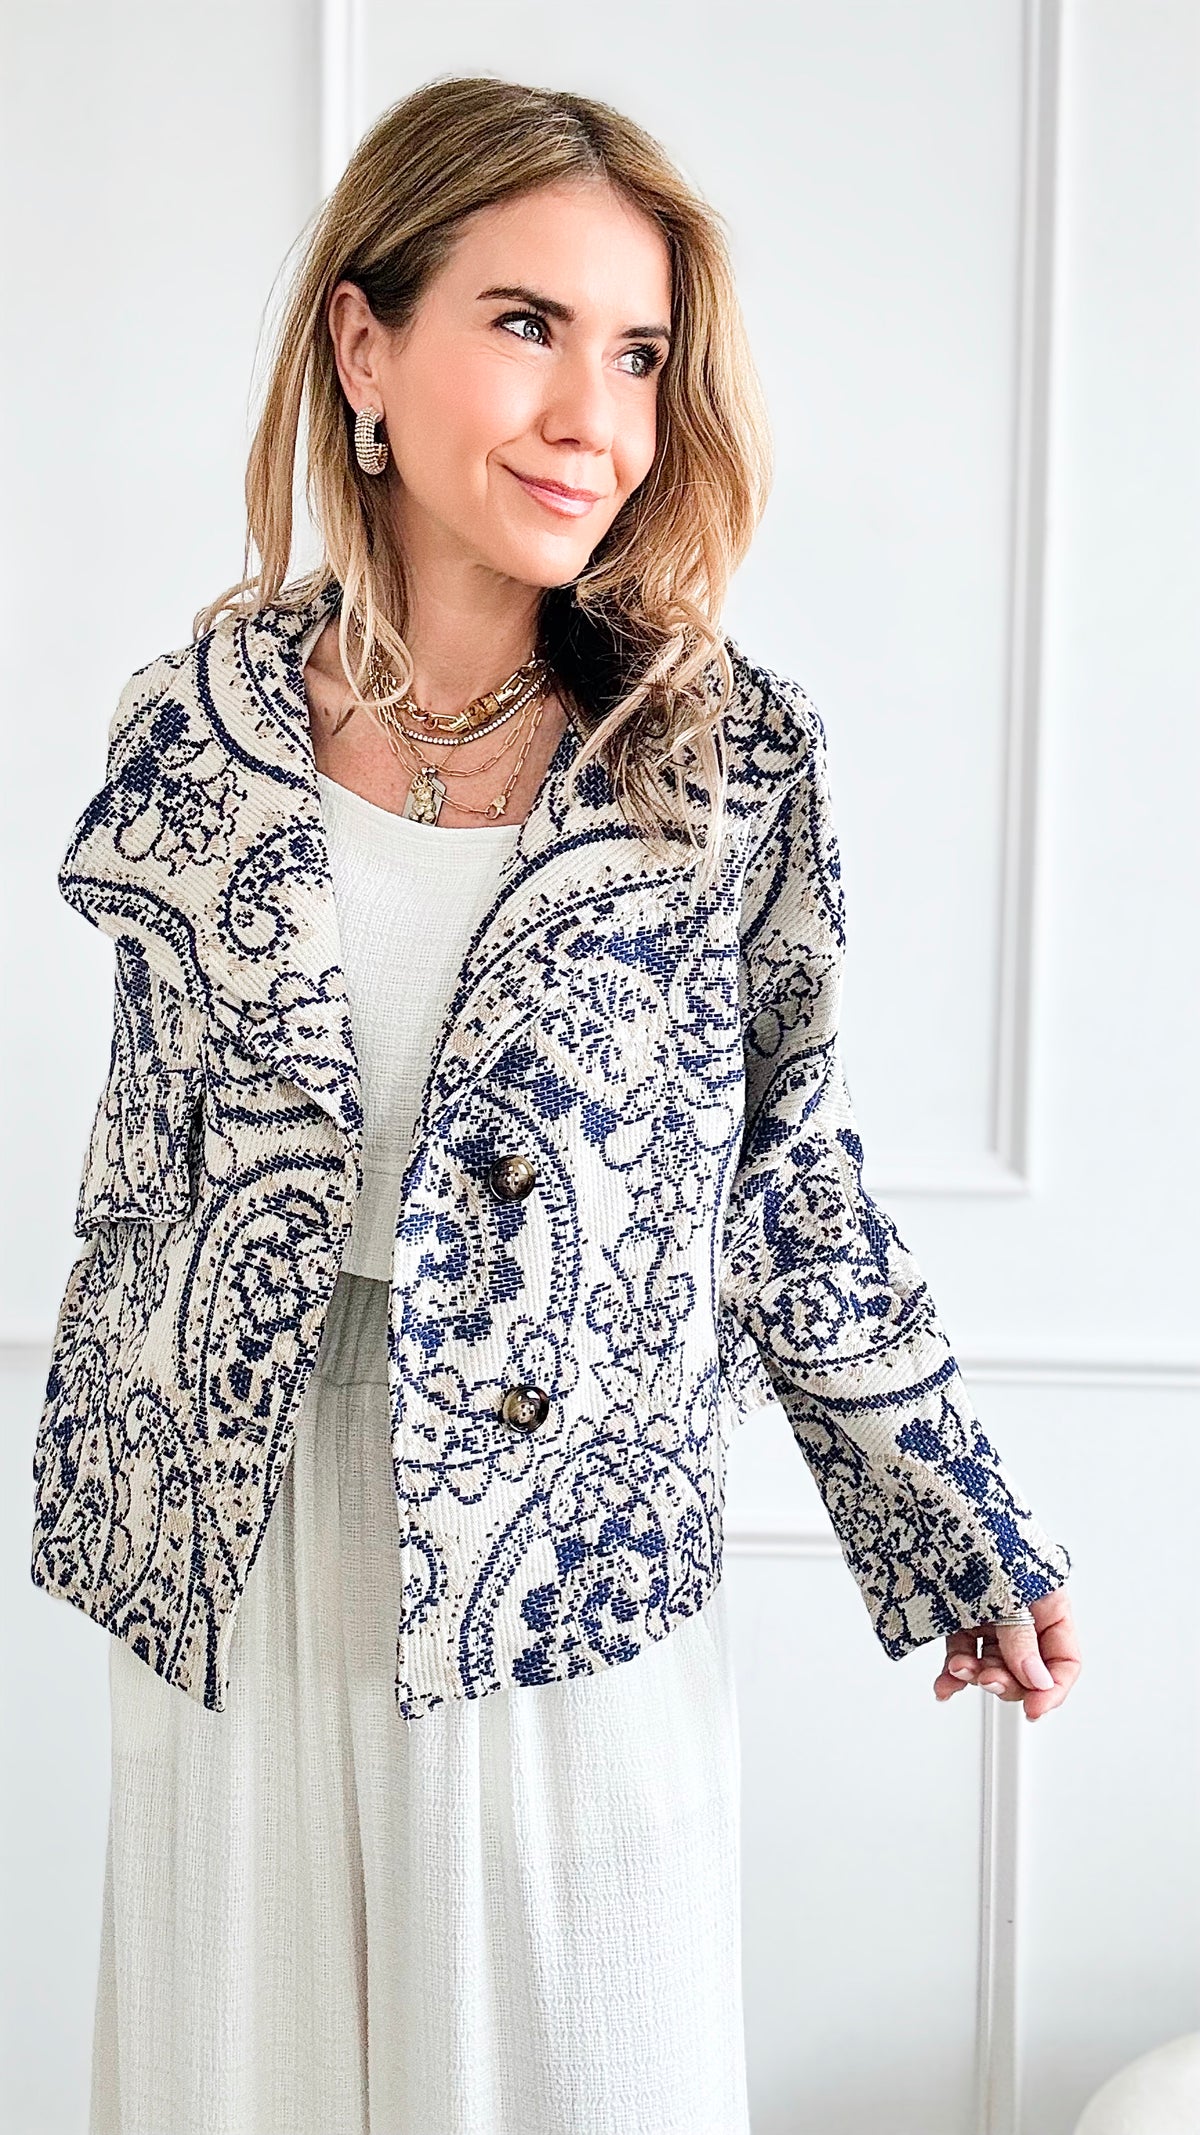 Paisley Print Italian Jacket - Navy/ Beige-160 Jackets-Germany-Coastal Bloom Boutique, find the trendiest versions of the popular styles and looks Located in Indialantic, FL